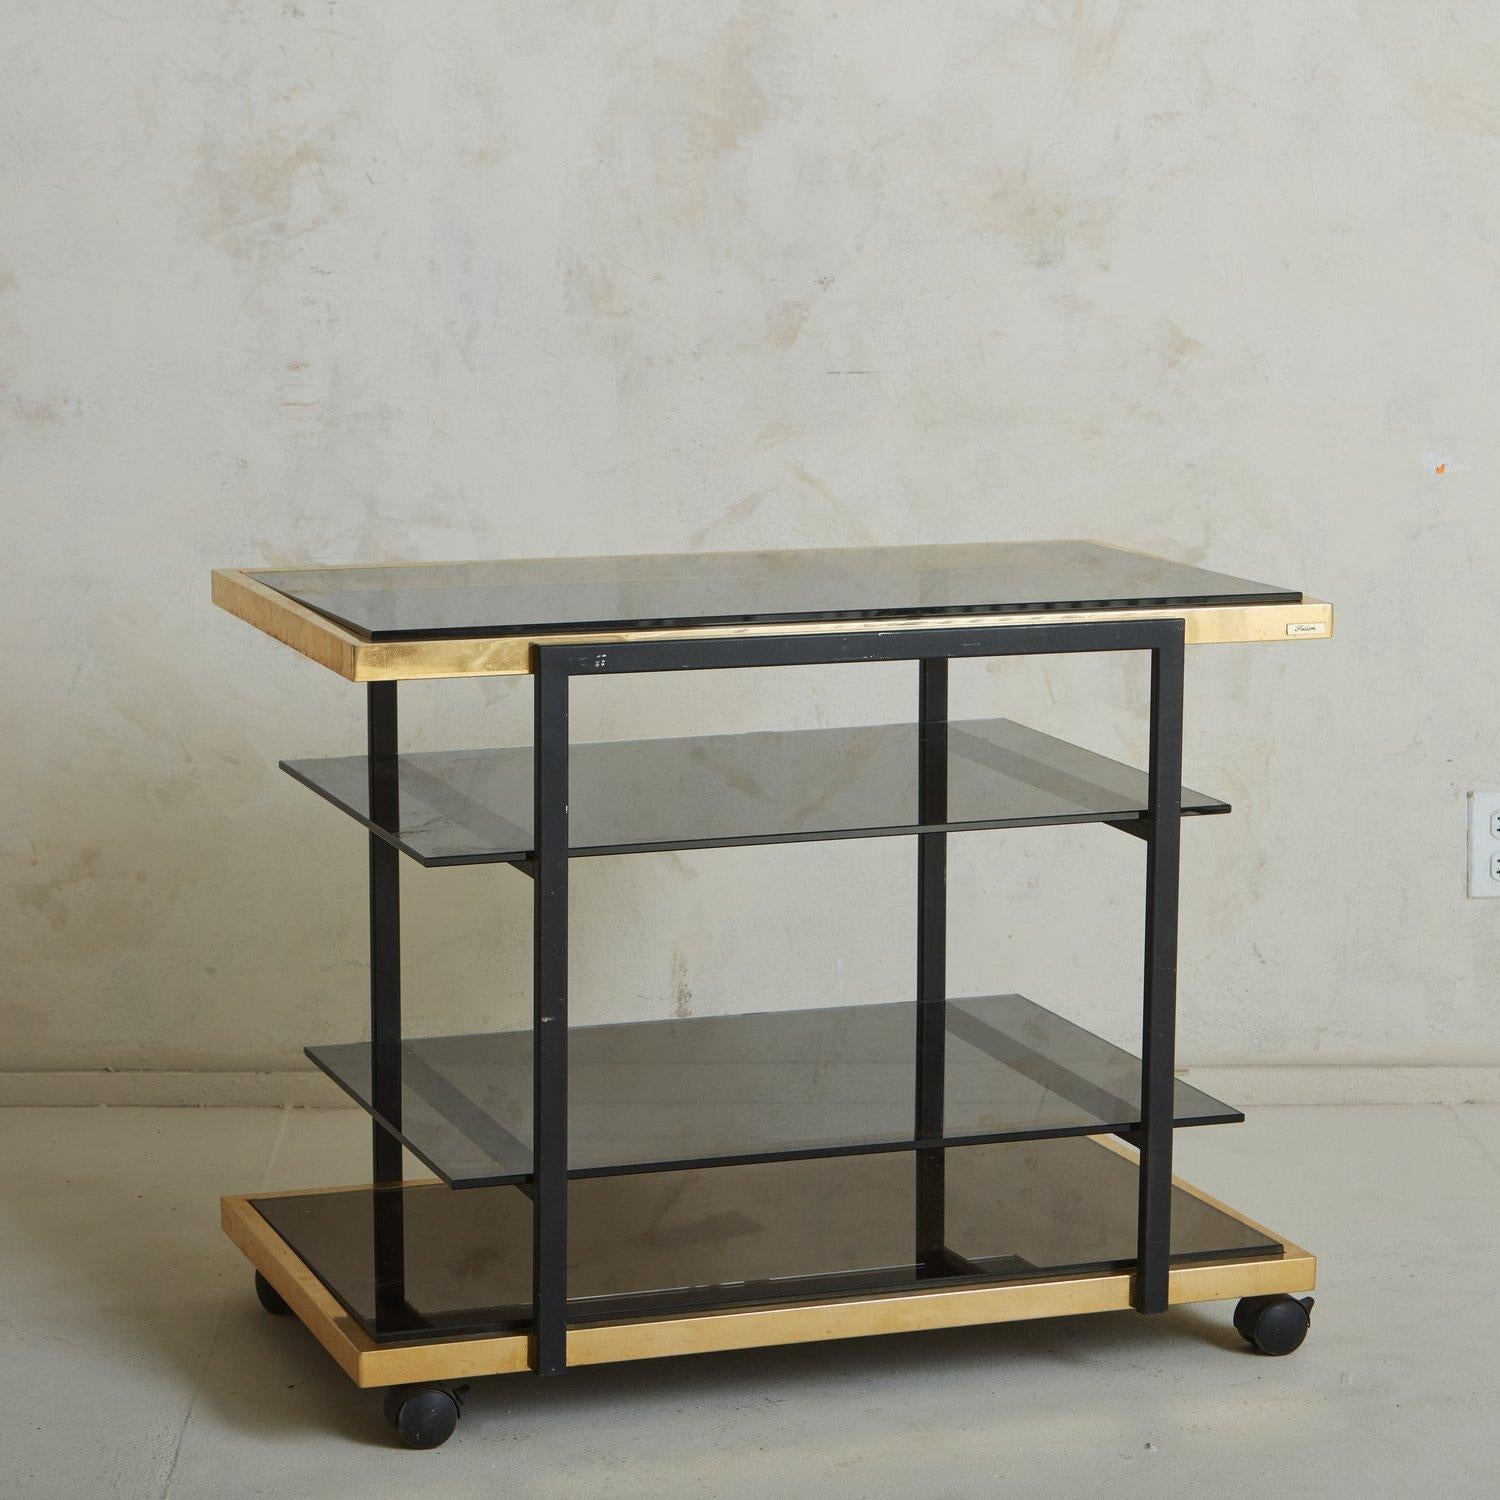 A vintage Belgian bar cart by Fedam featuring a brass and black metal frame with four smoked glass shelves. This cart is on casters for easy mobility and offers significant storage space, perfect for styling barware, bottles and books. Retains